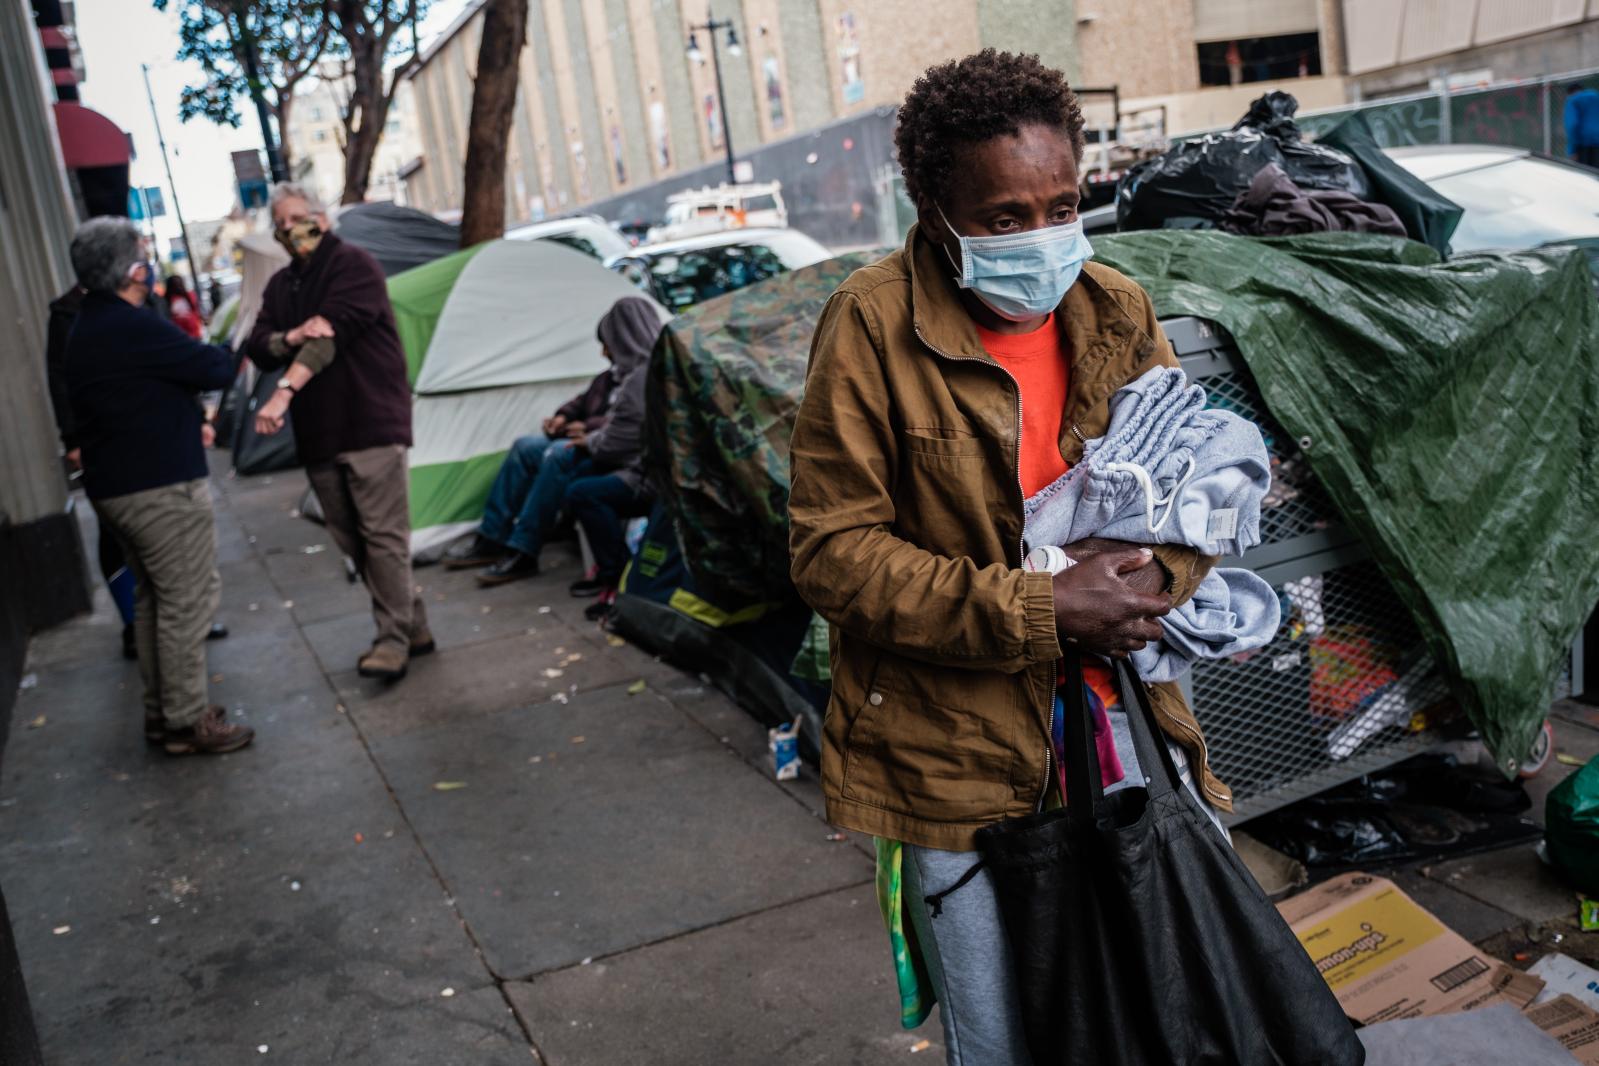 Image from San Francisco's Housing Crisis - A woman only identified as “Felicia” who...